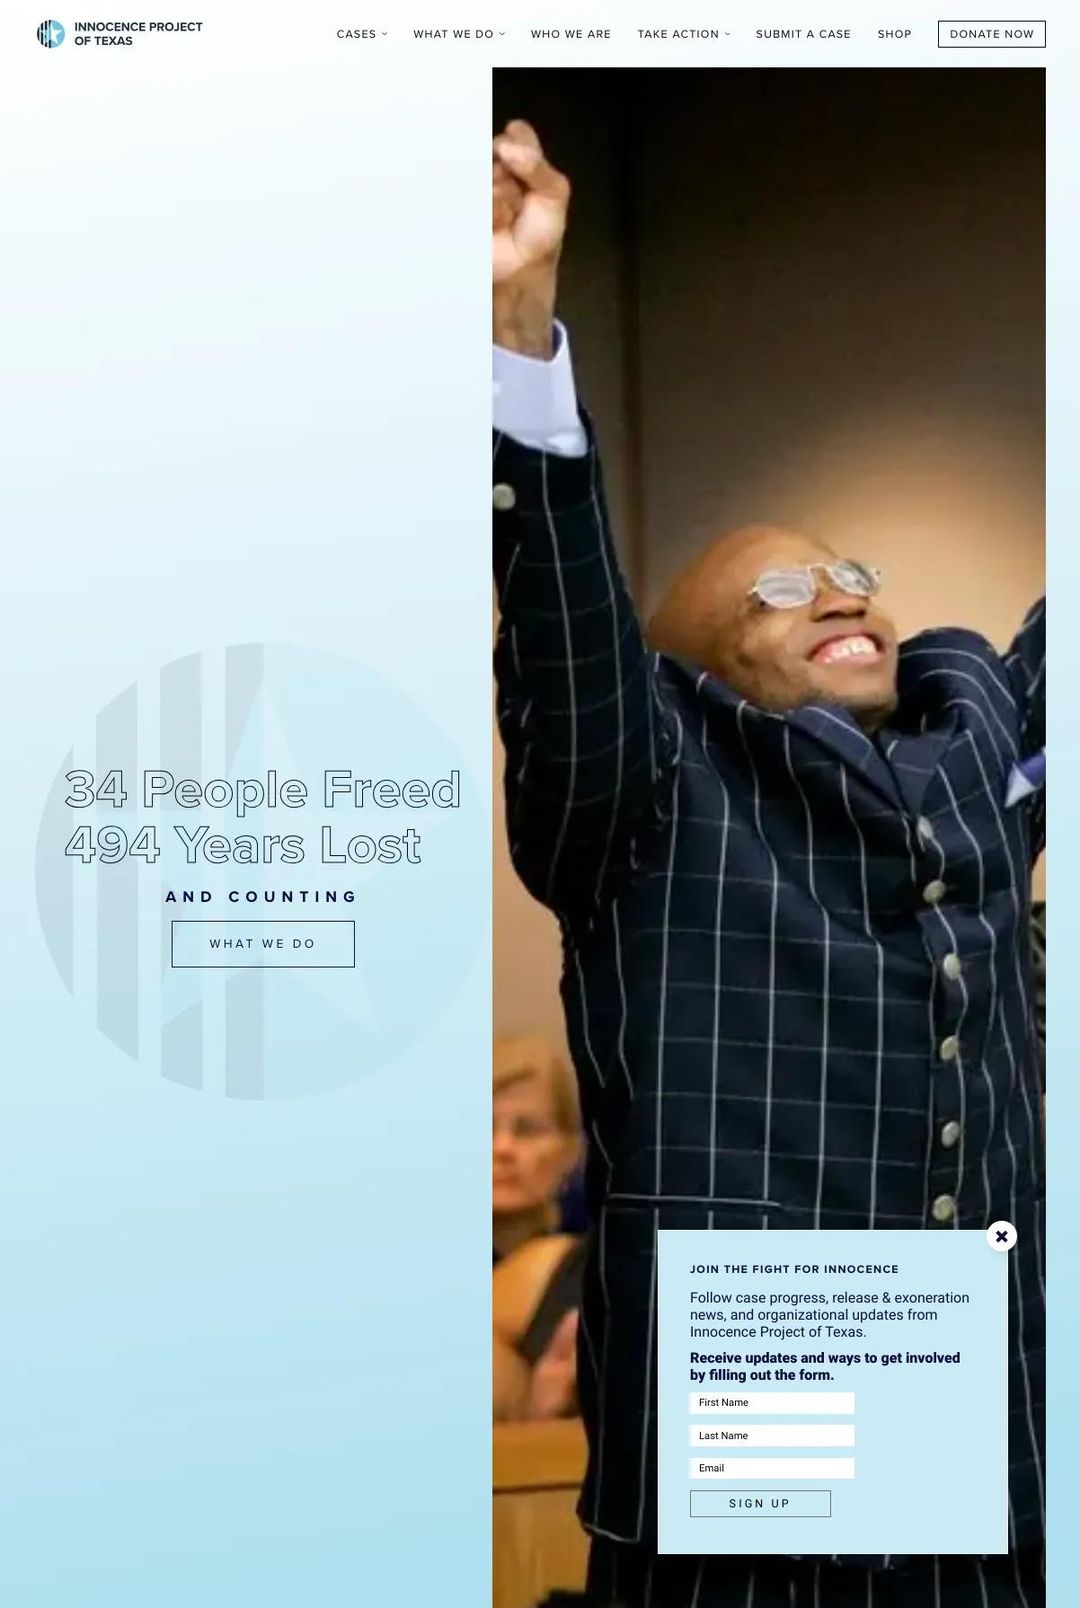 Screenshot 1 of Innocence Project of Texas (Example Squarespace Nonprofit Website)